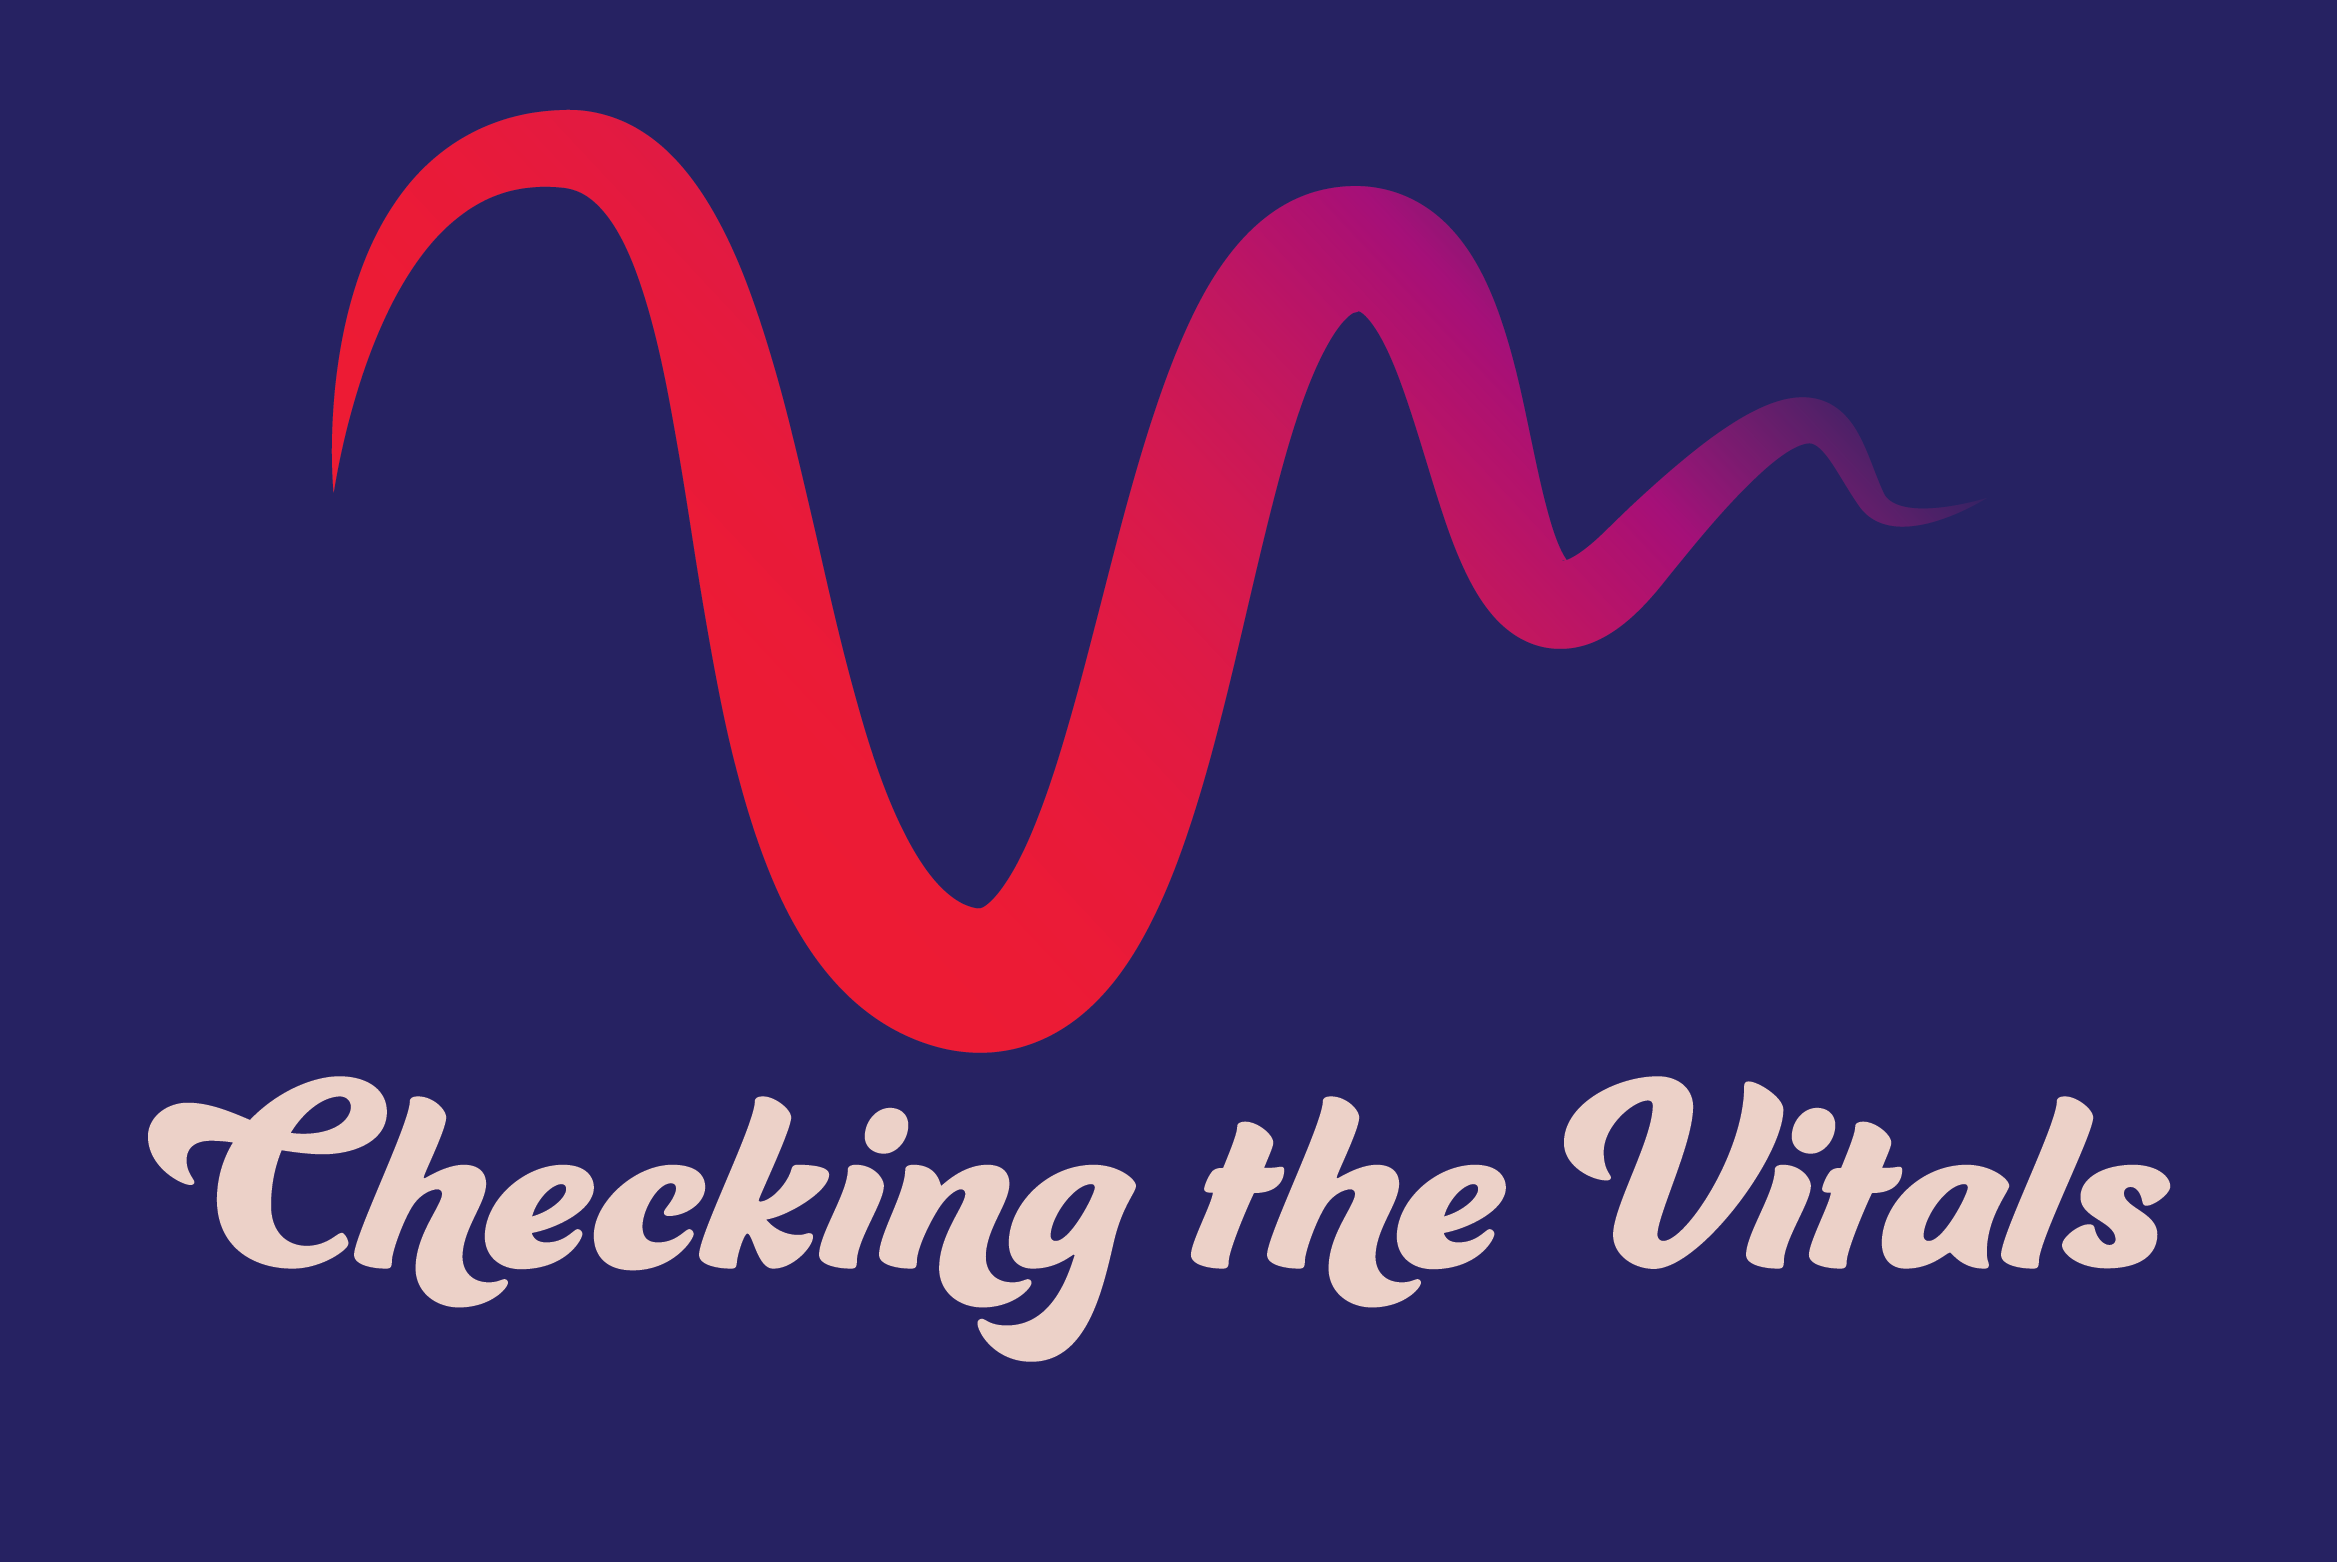 Checking the Vitals Healthcare Podcast